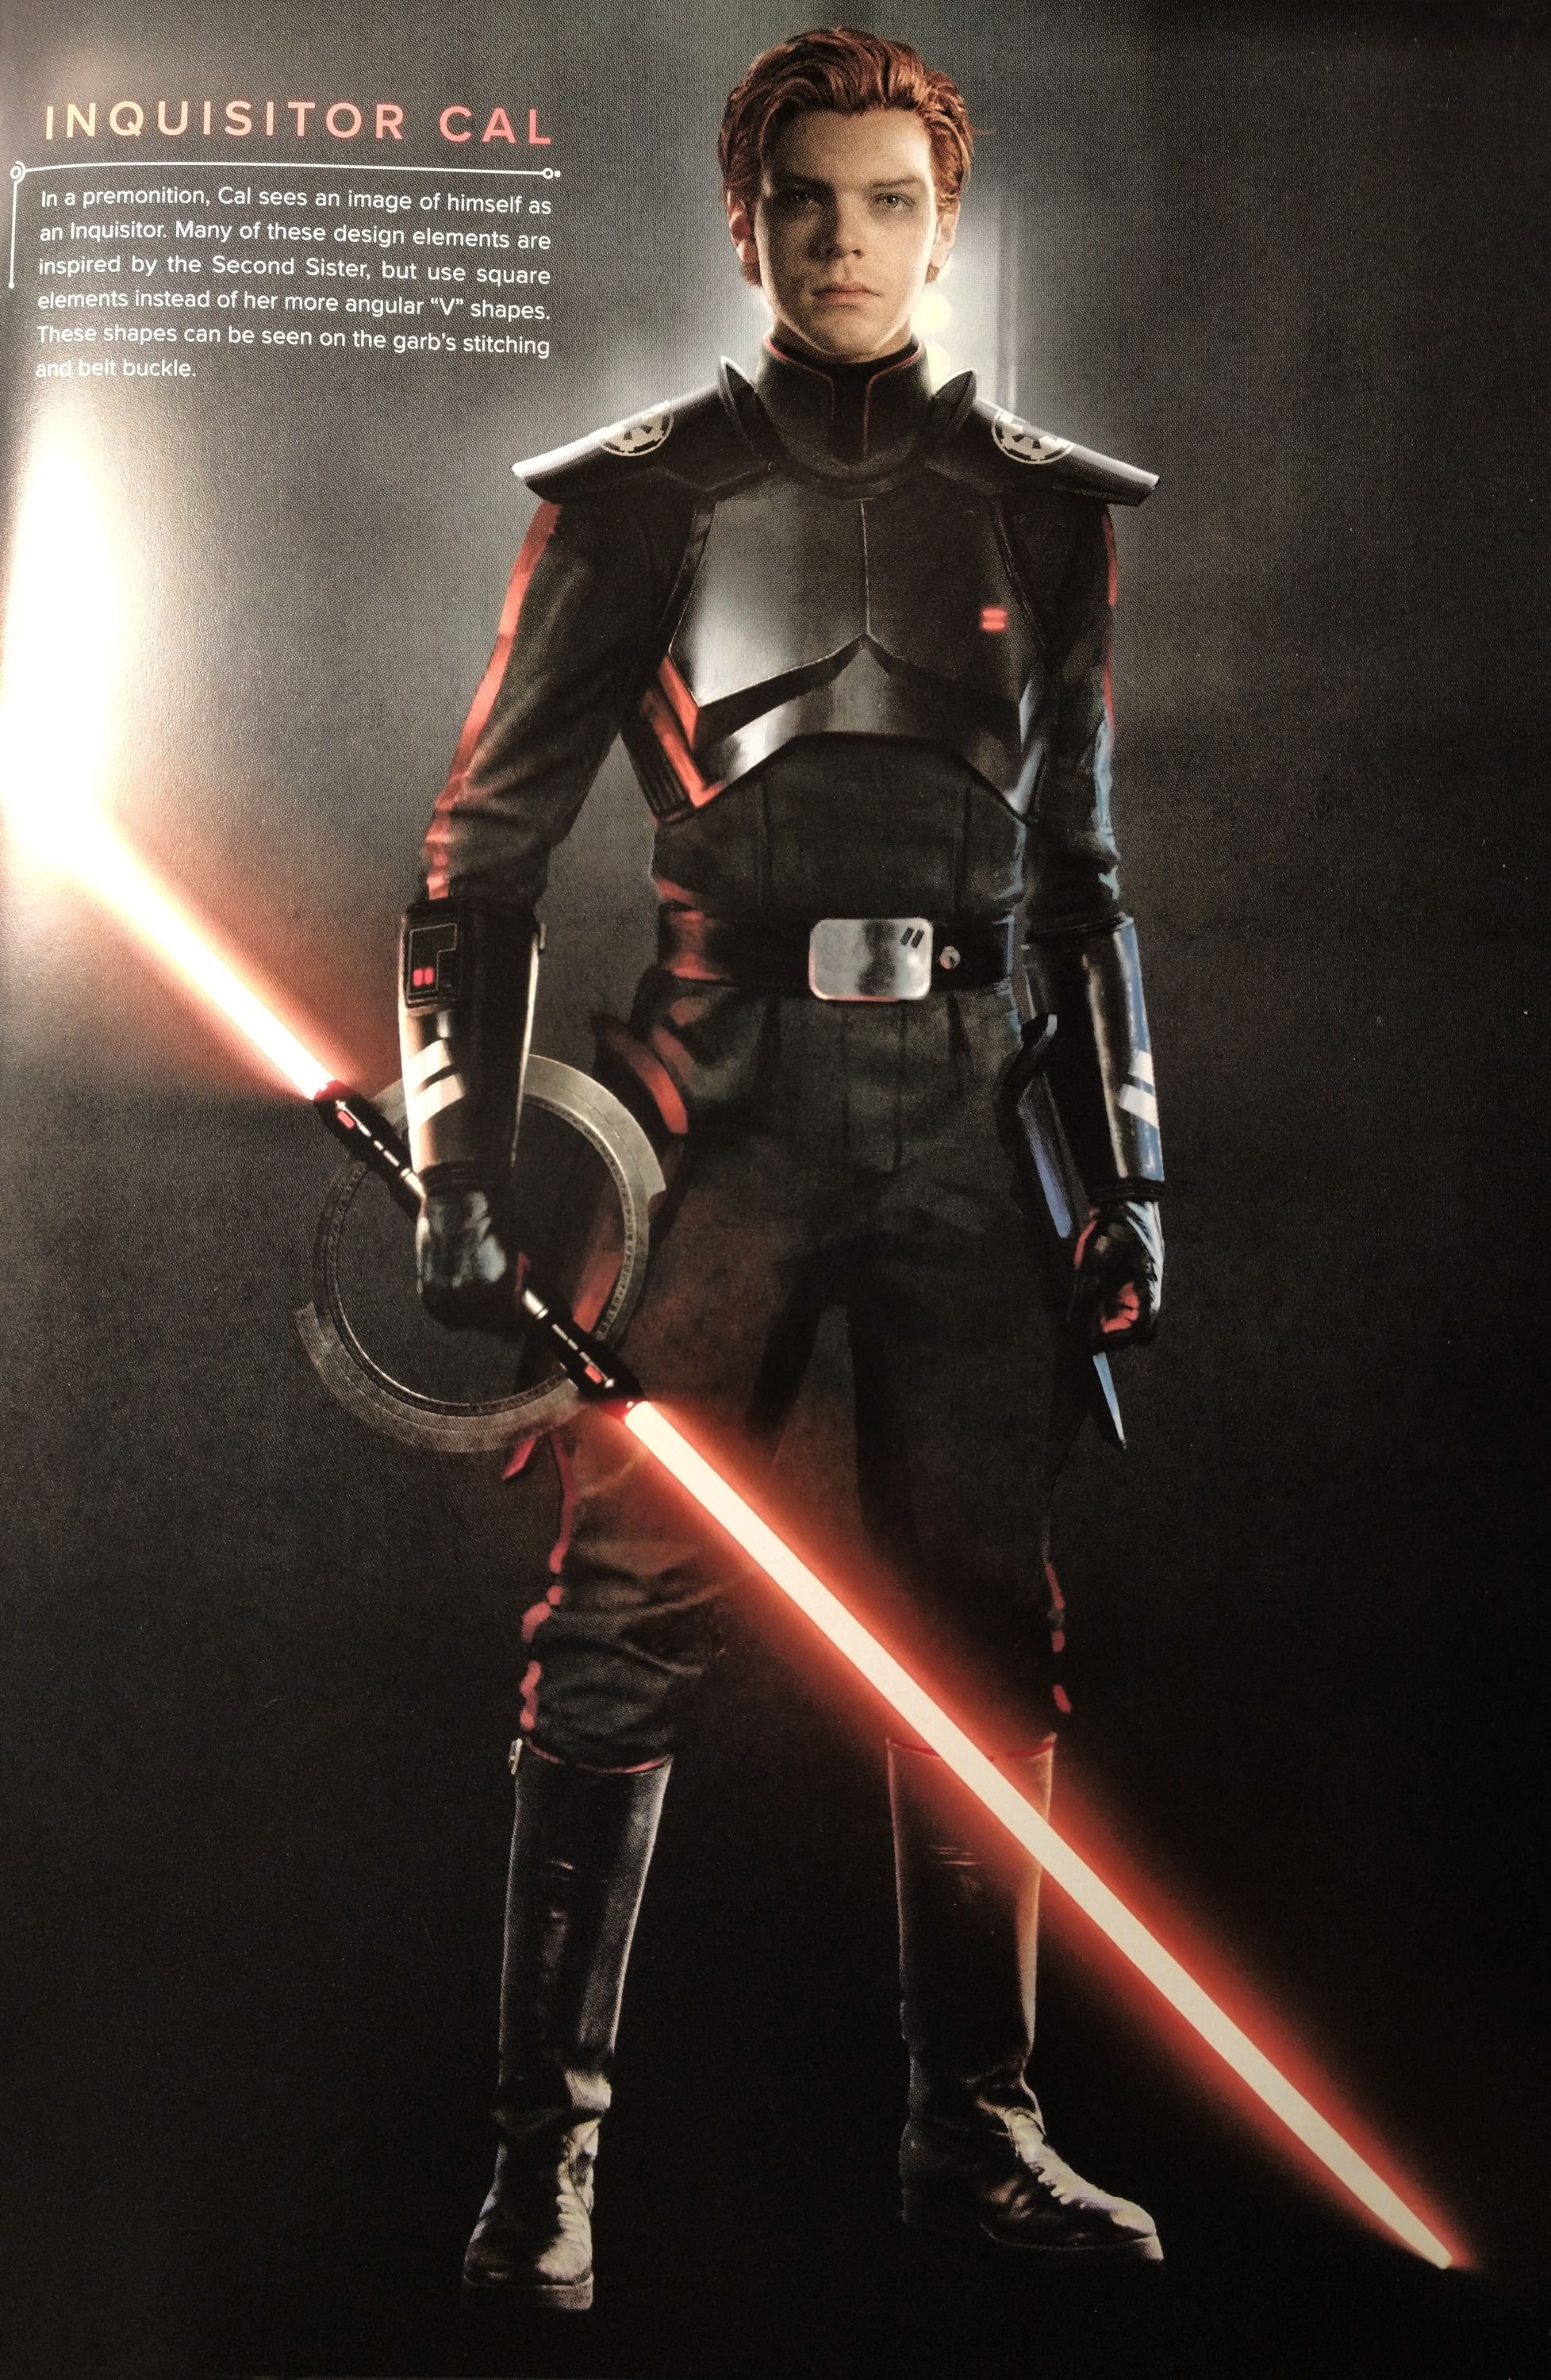 Inquisitor Cal In a premonition, Cal sees an image of himself as an Inquisitor. Many of these design elements. Star wars image, Star wars fallen order, Star wars